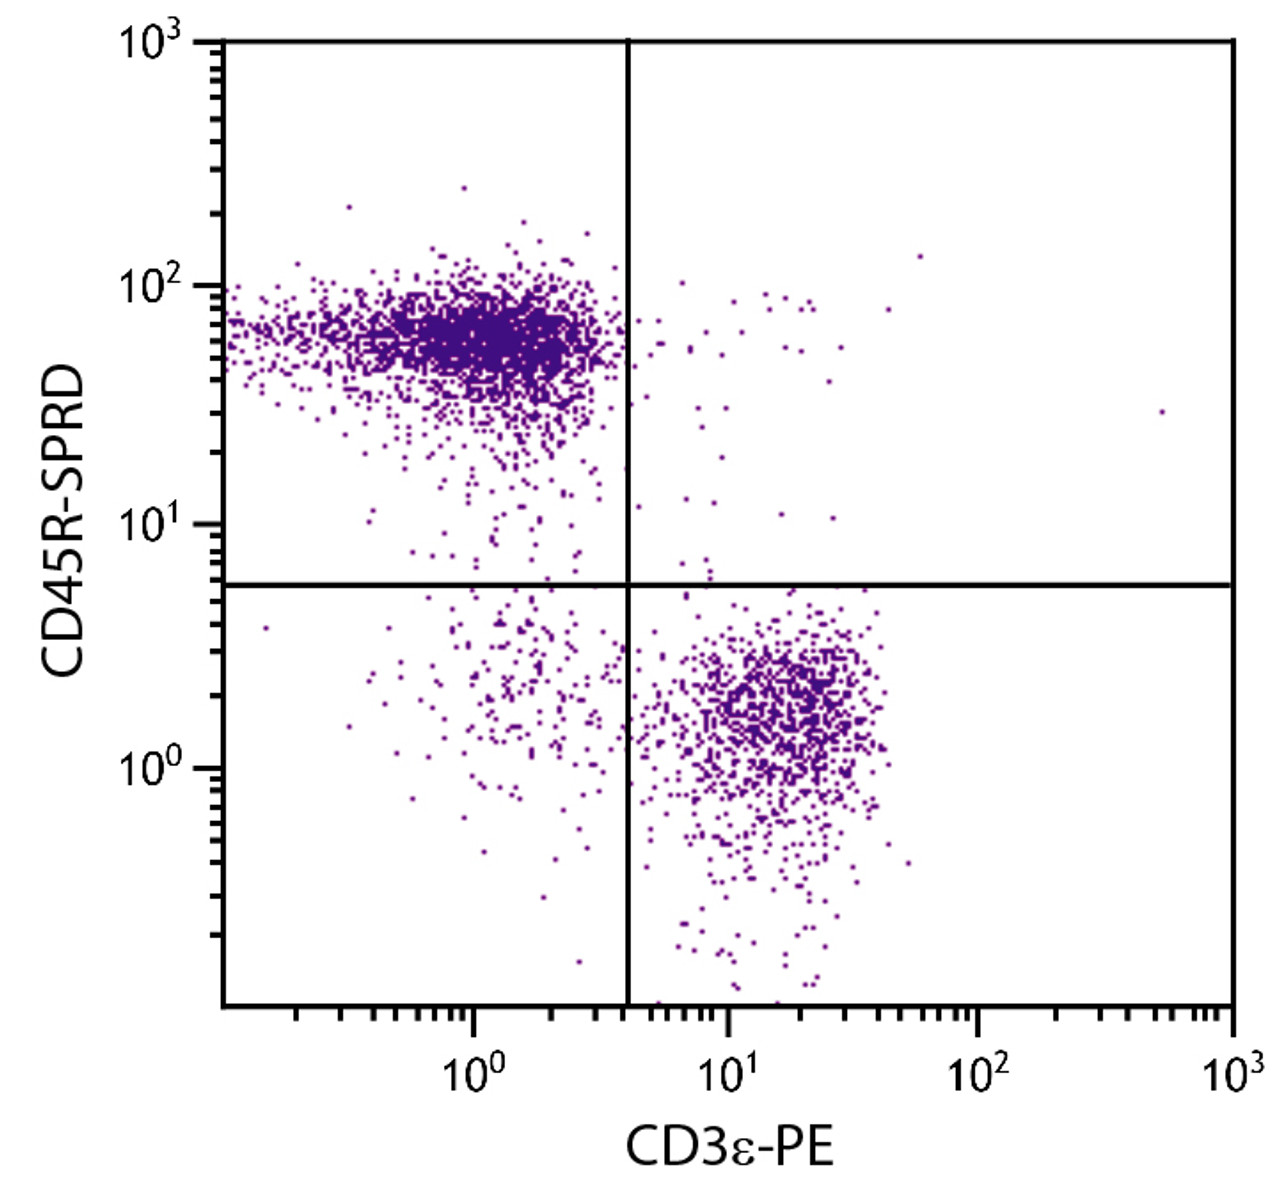 C57BL/6 mouse splenocytes were stained with Rat Anti-Mouse CD45R-SPRD (Cat. No. 98-791) and Rat Anti-Mouse CD3?-PE .